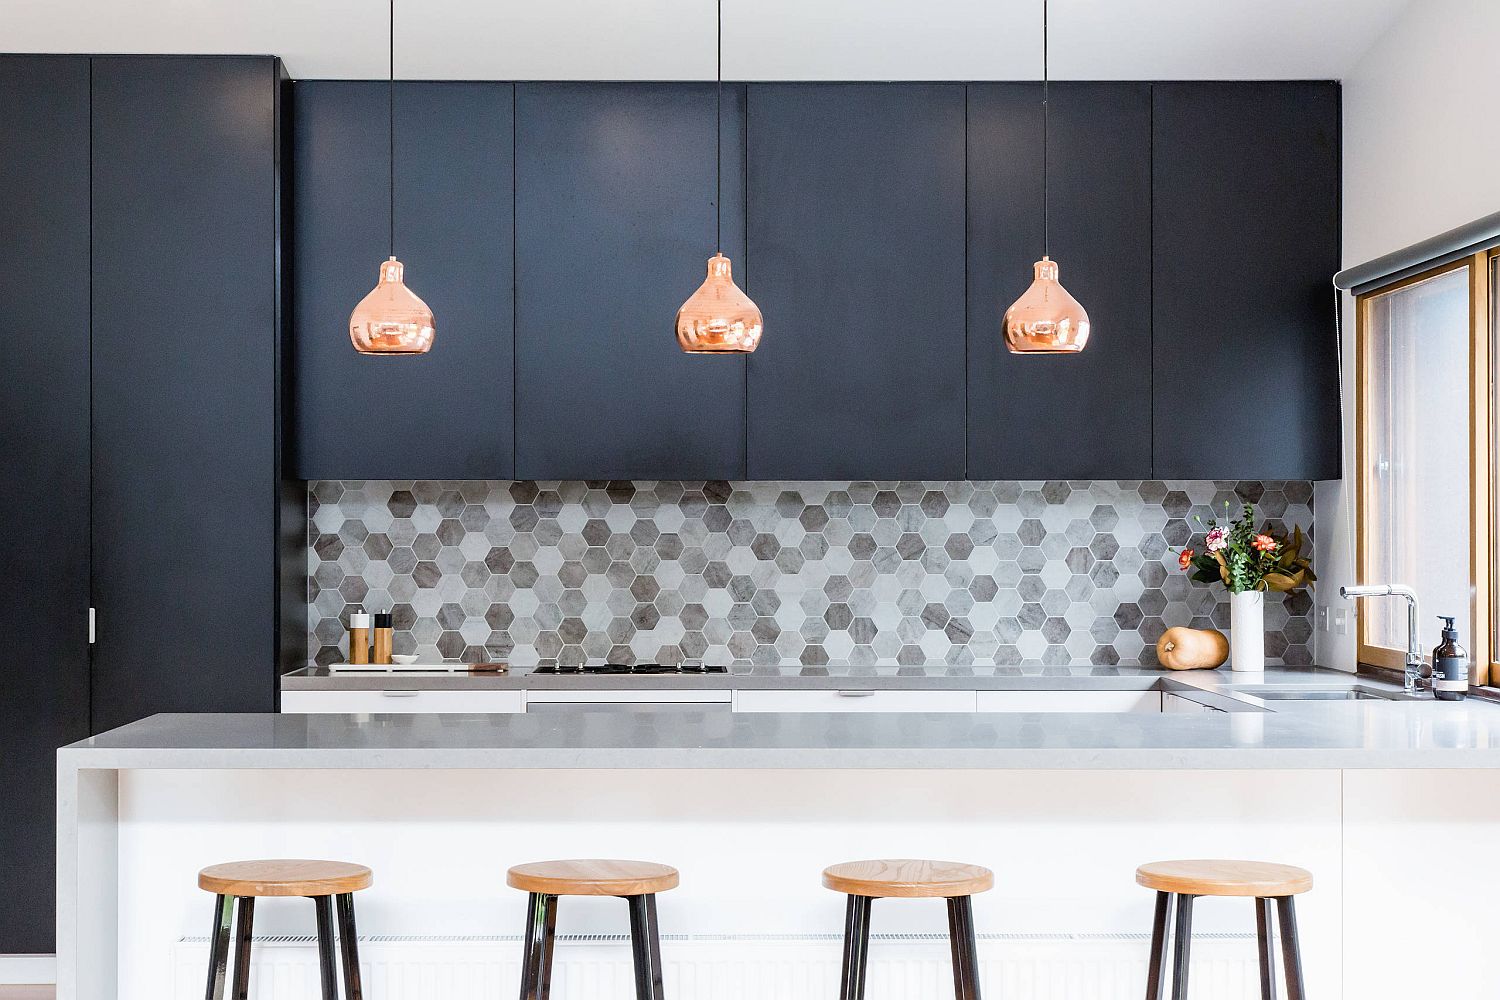 Gray-hexagonal-tiled-kitchen-backsplash-is-a-popular-choice-you-cannot-go-wrong-with